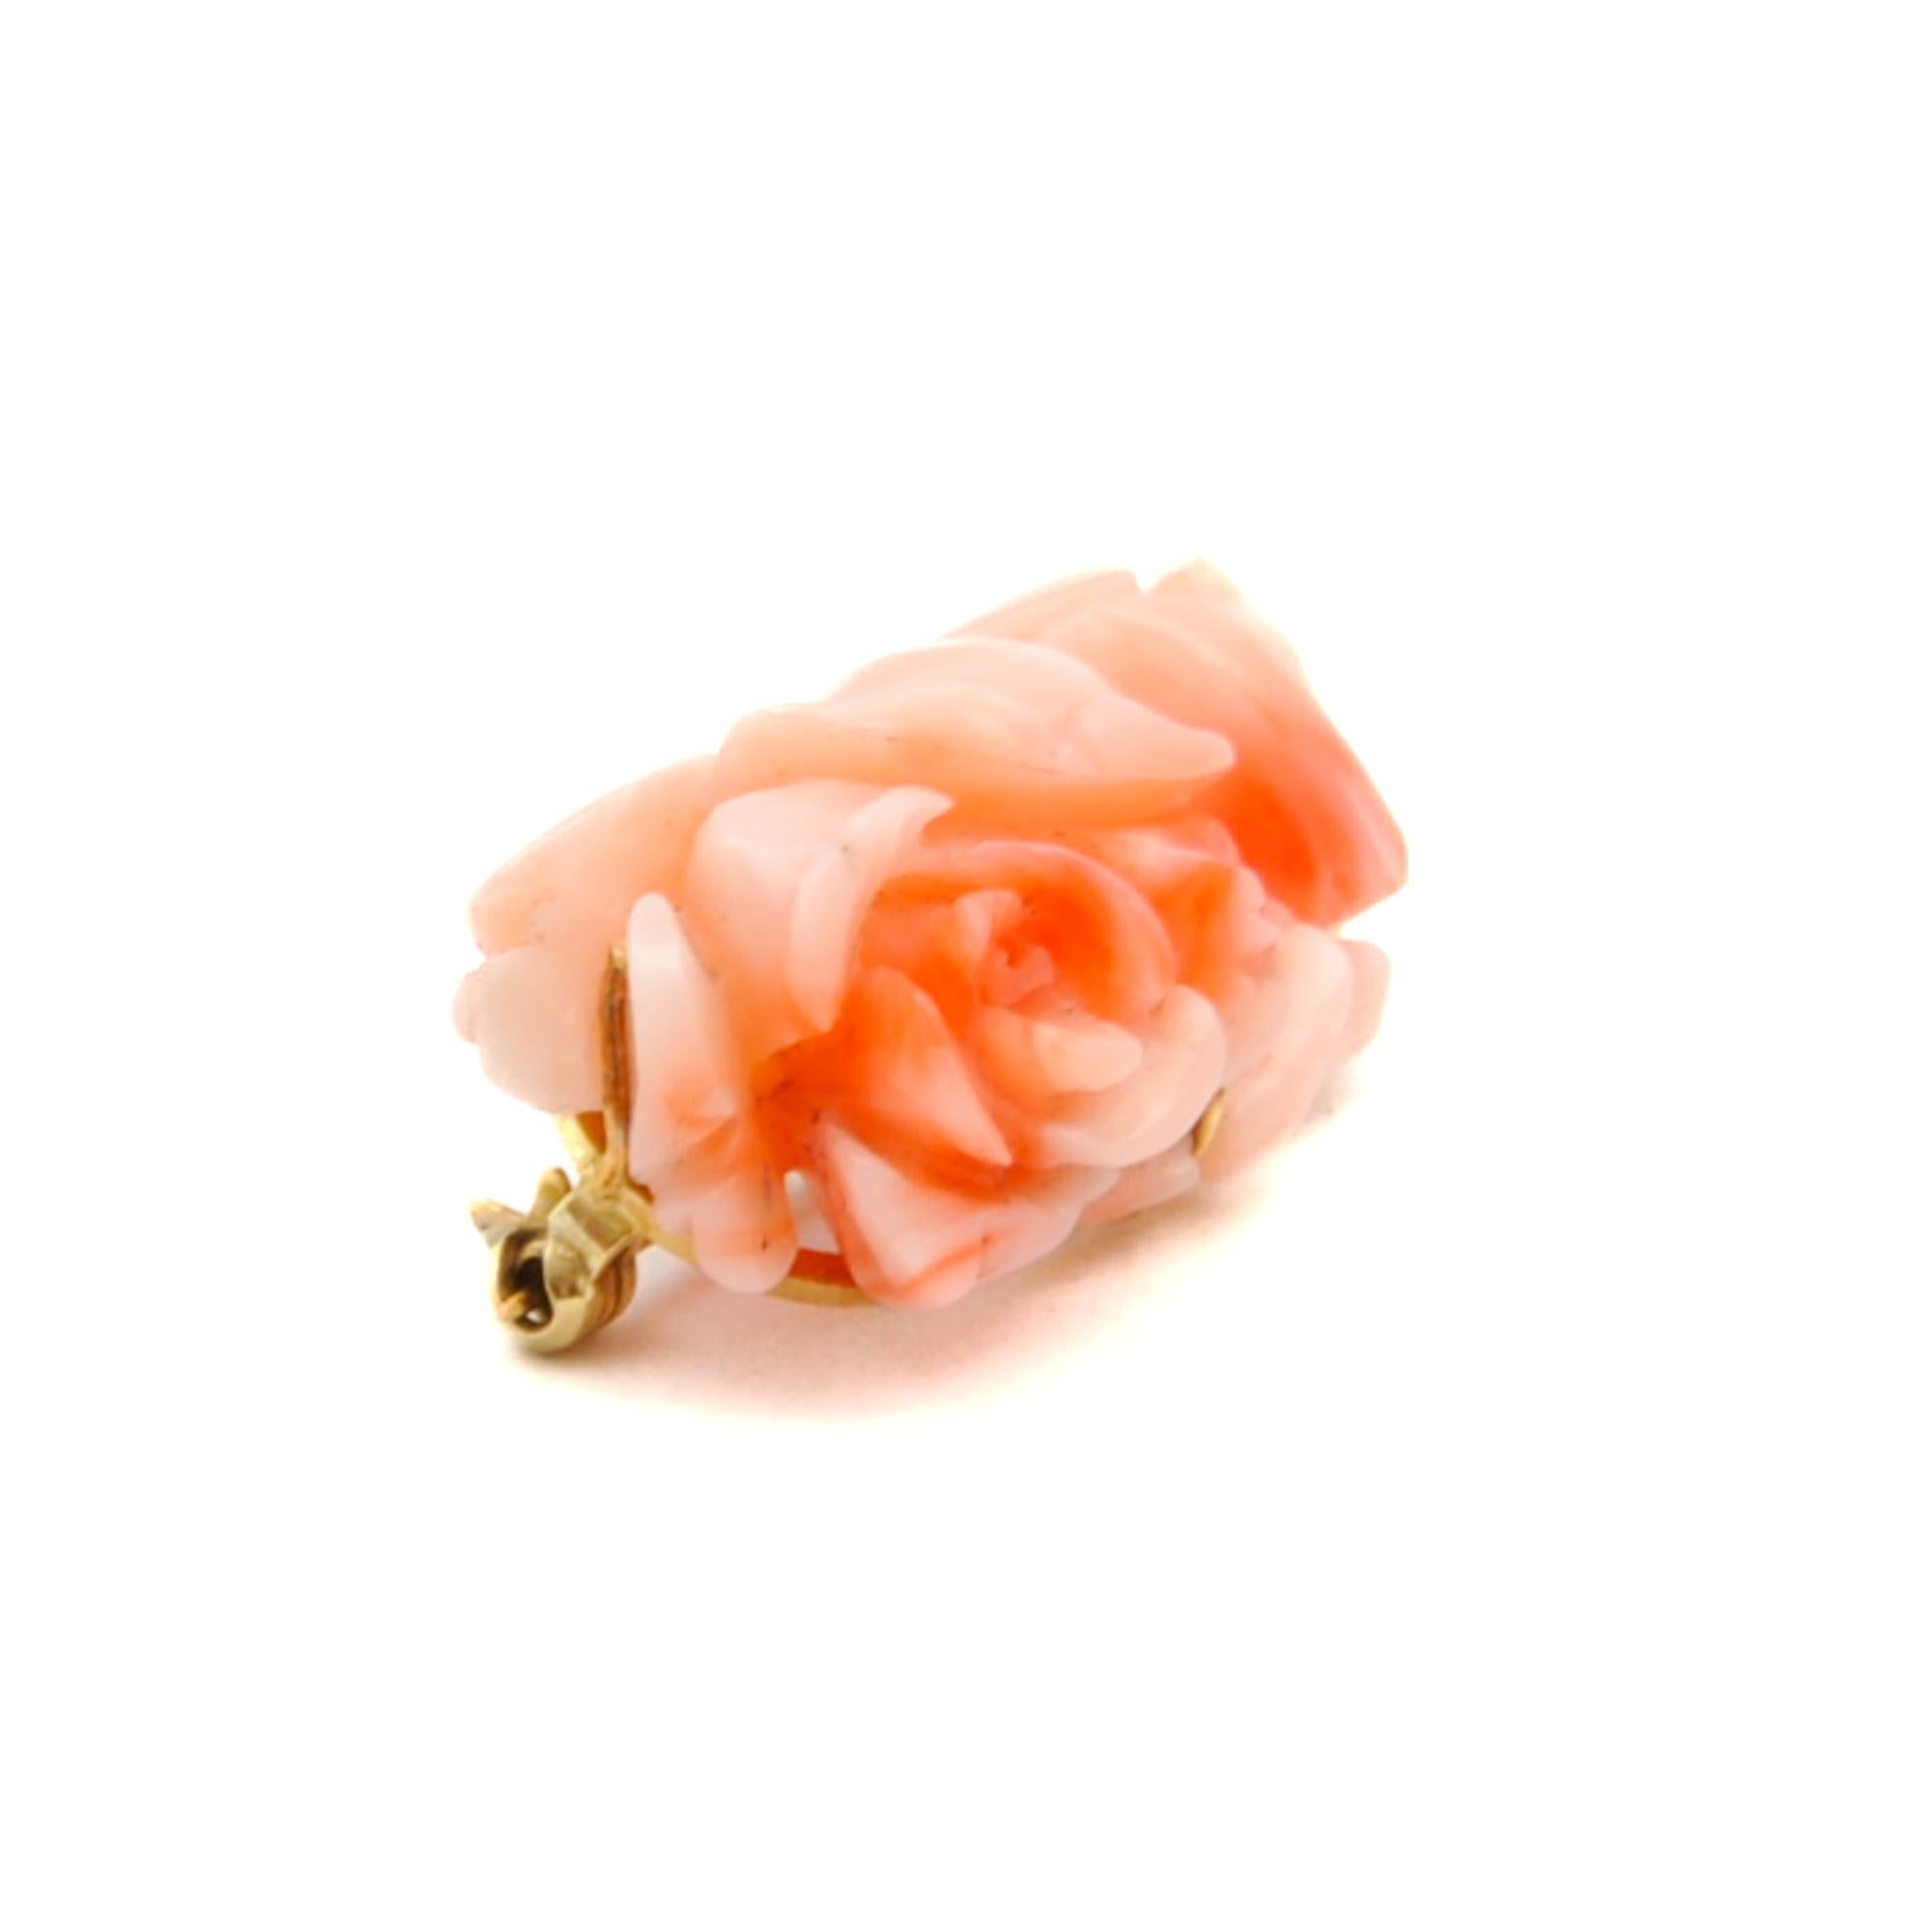 A vintage pink coral brooch set in a gold frame. The coral is carved into a beautiful blossoming rose flower and attached to a gold frame on the back. Coral is considered a symbol of renewal, vitality and beauty. The brooch contains the pinkish and